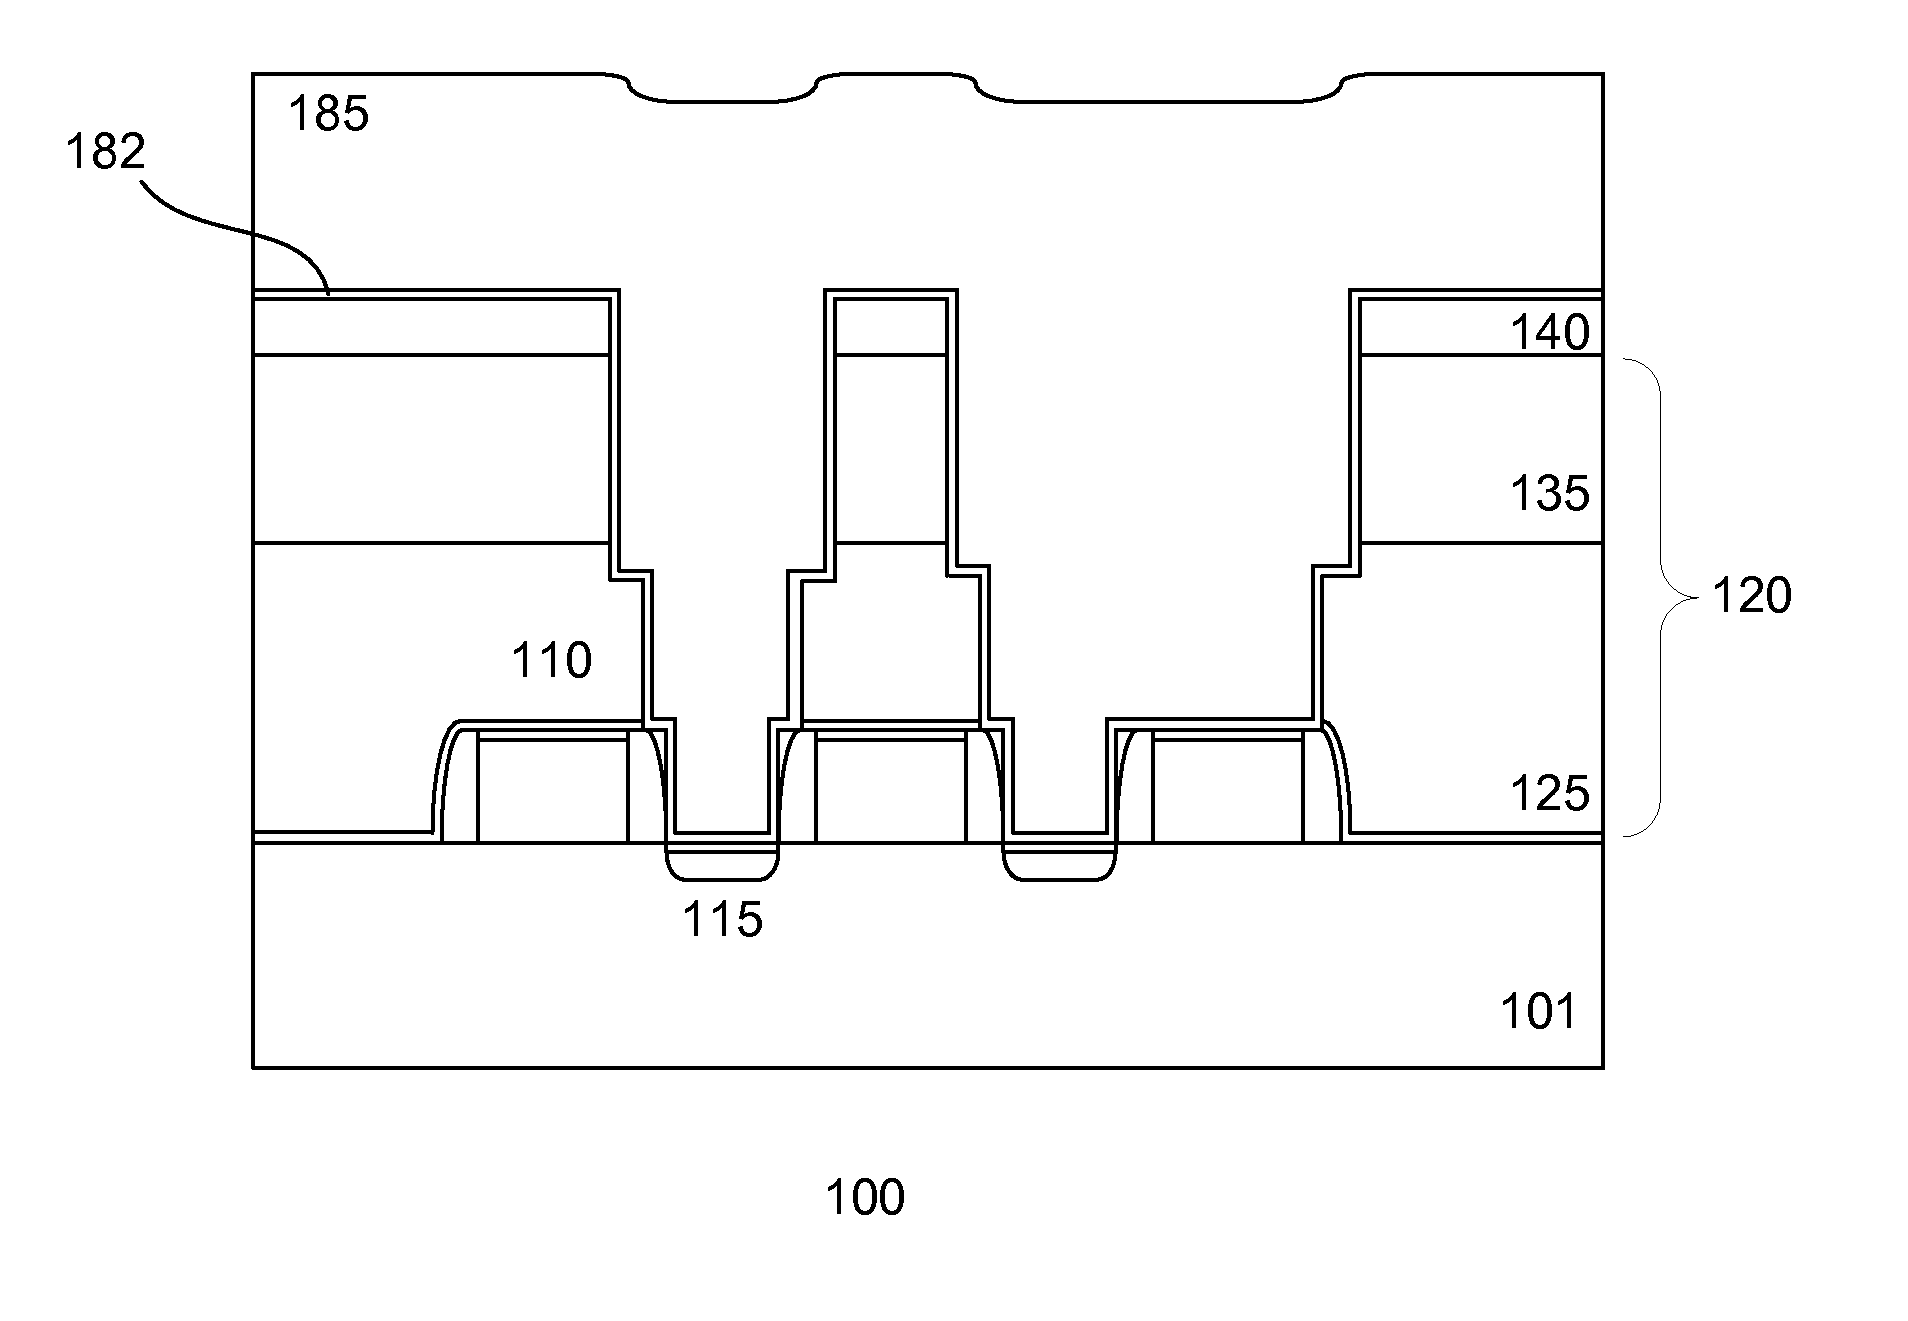 Damascene Contact Structure for Integrated Circuits